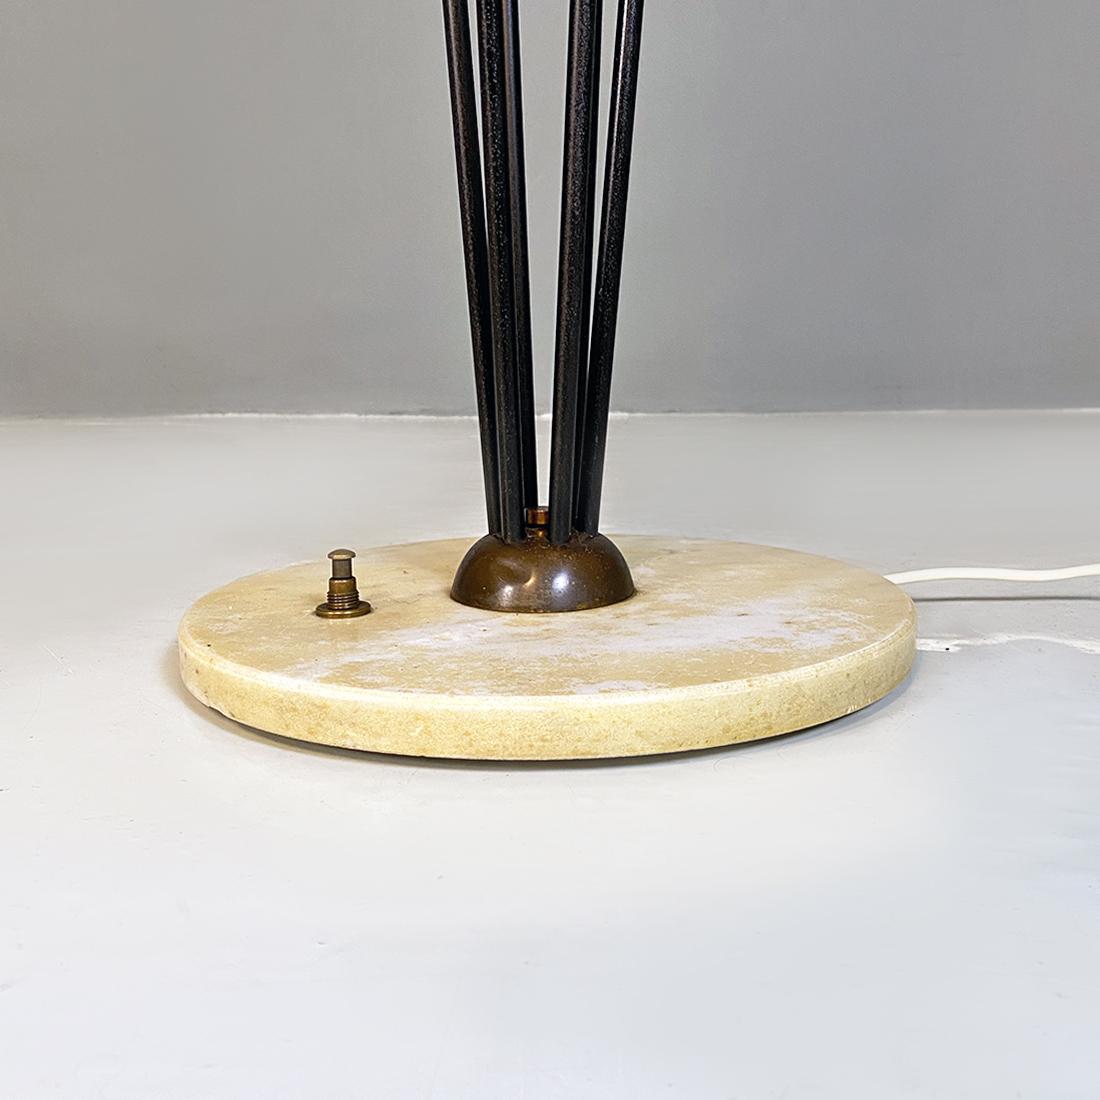 Italian Mid Century Marble Metal and Glass Alberello Lamp by Stilnovo, 1950s For Sale 6